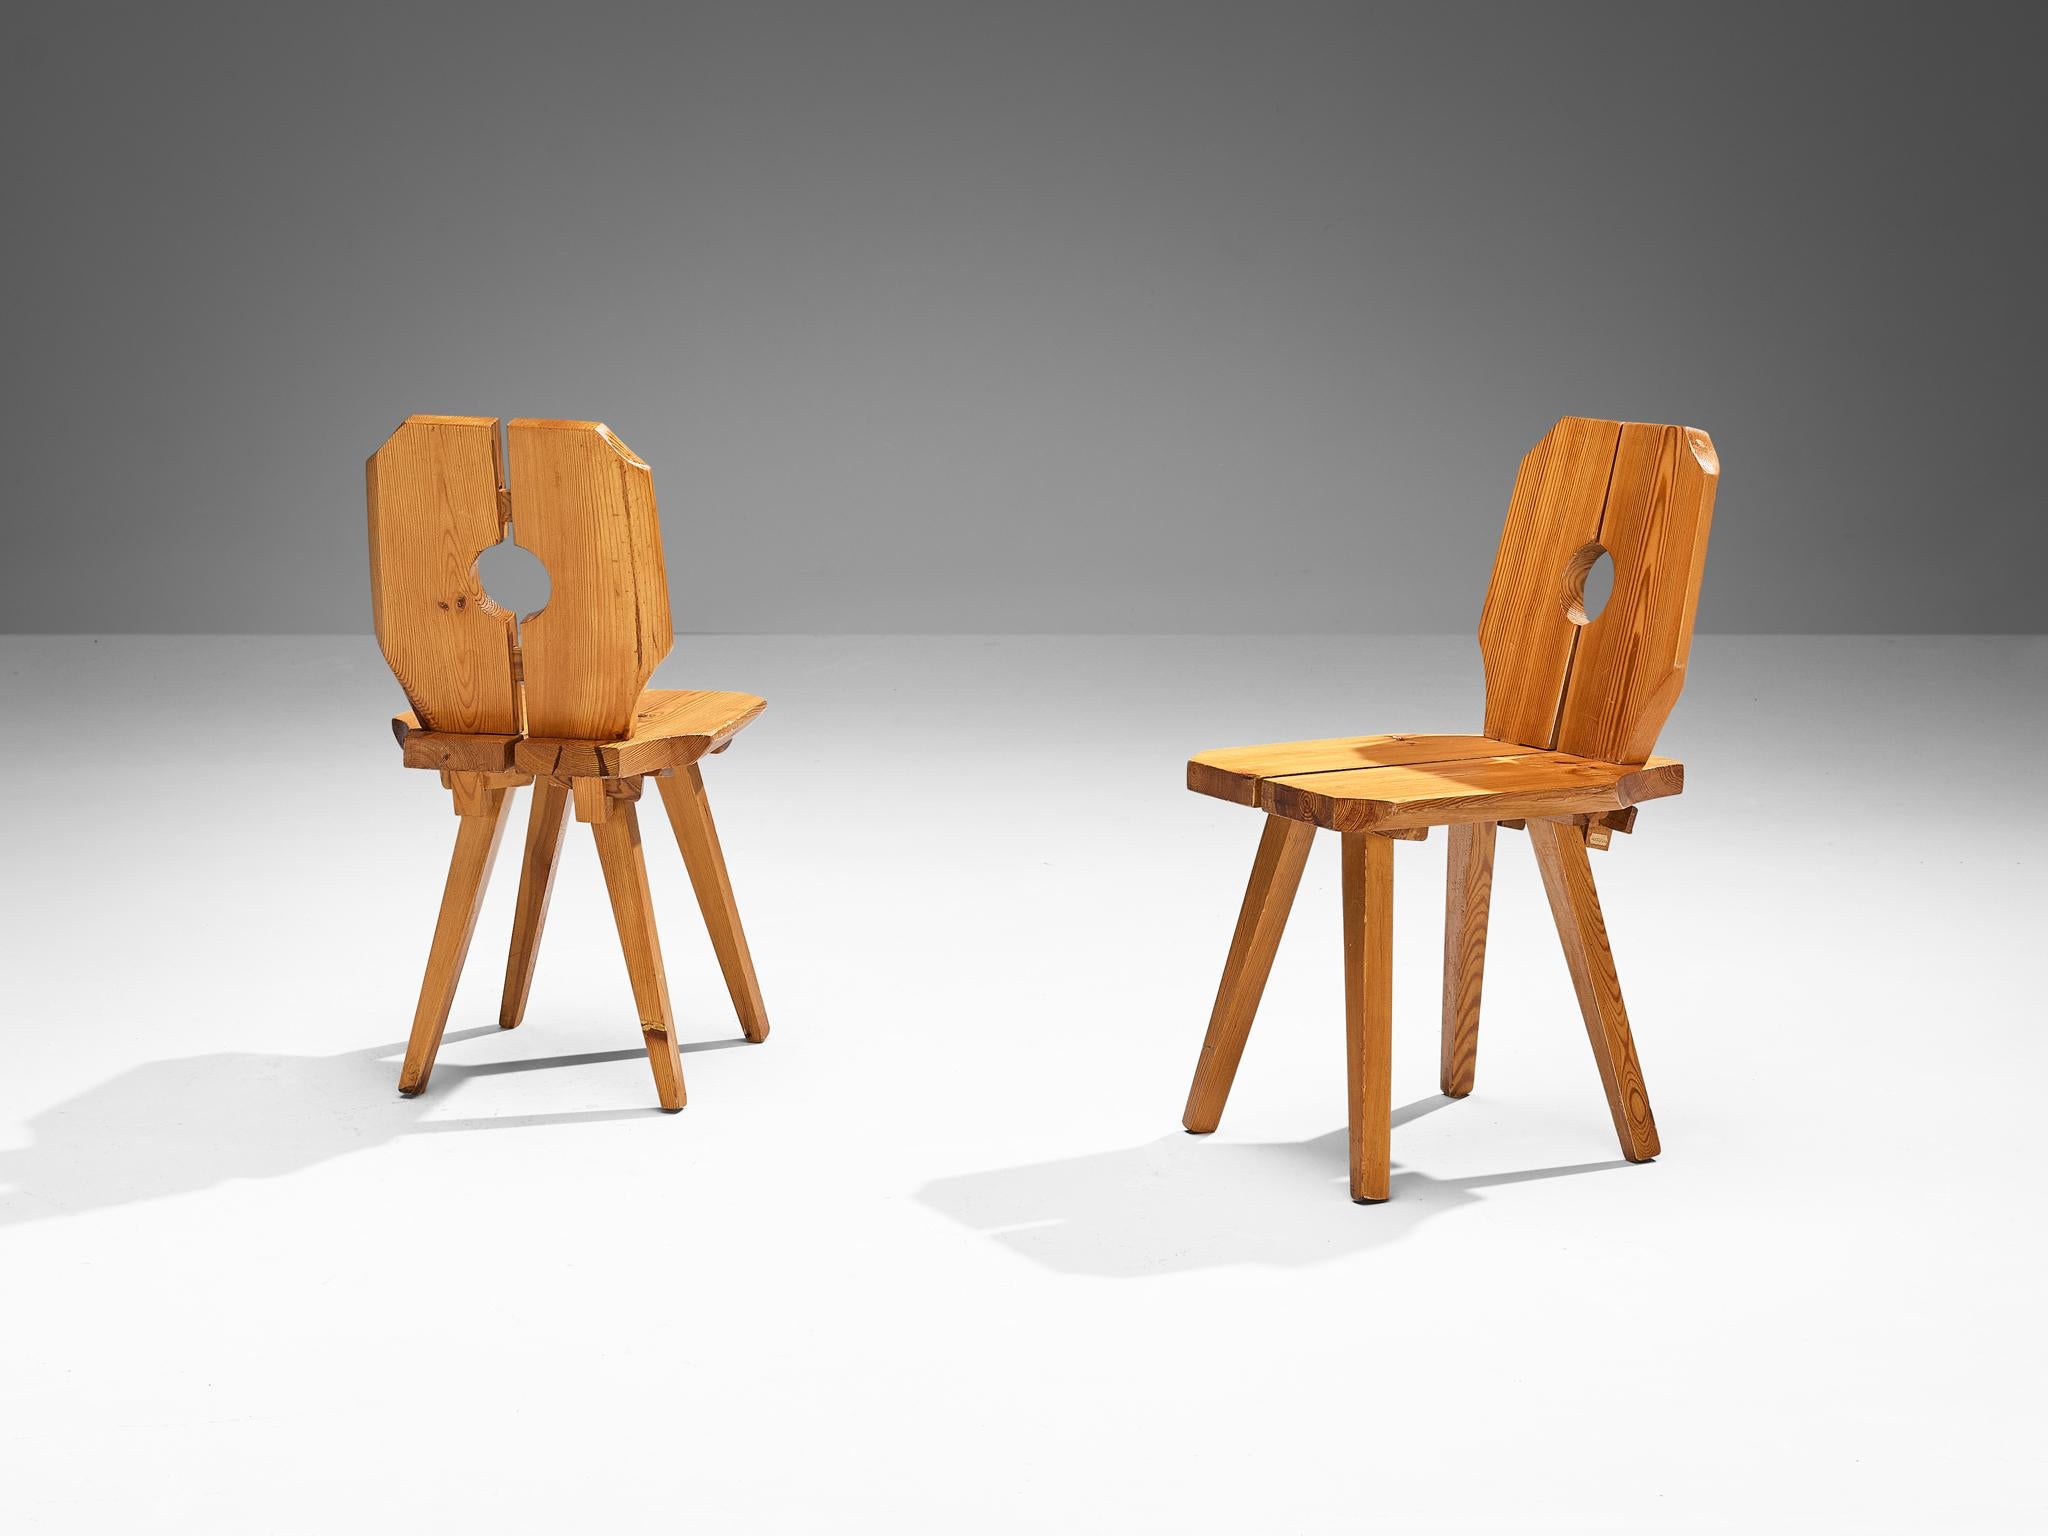 Pair of dining chairs, solid pine, Europe, 1960s

Sculpted dining chairs in expressively grained pine. Multiple features characterize the sculpted look of this set of twelve chairs. Firstly, the polygonal shaped backrest and seat that are parted in